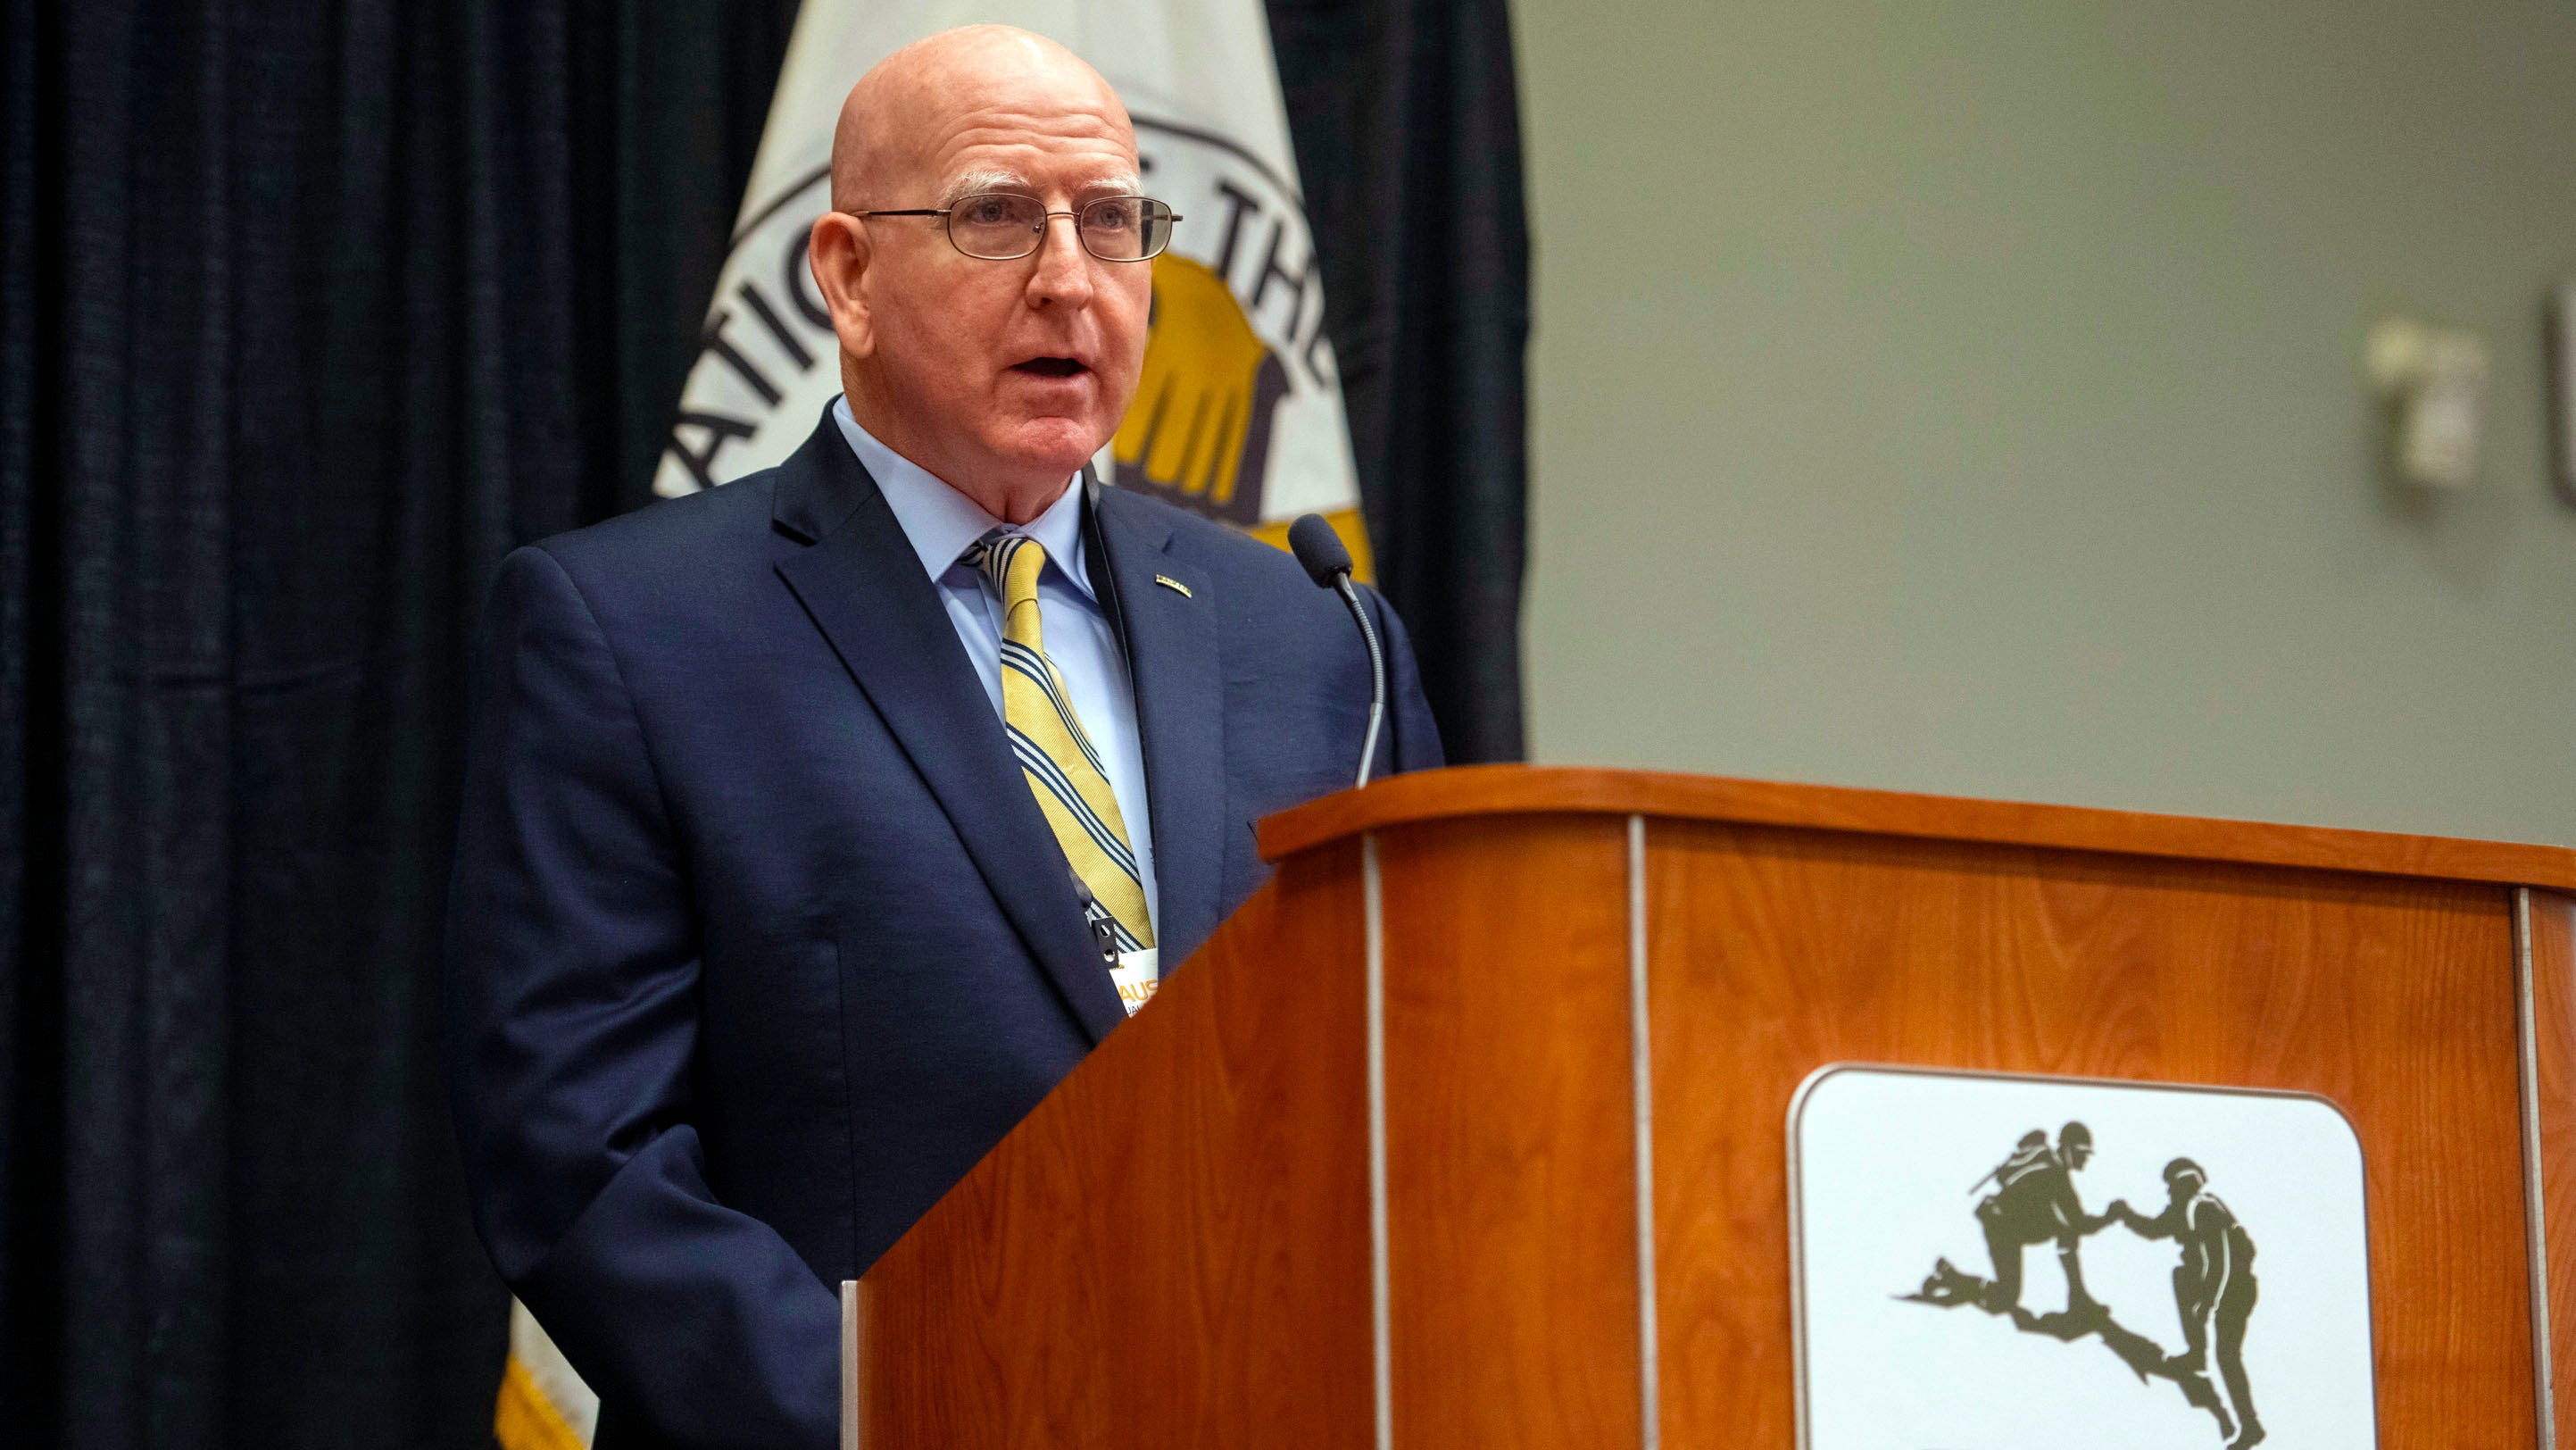 Retired MG Gregg F. Martin, author of Bipolar General: My Forever War with Mental Illness, speaks at the Author's Forum at the AUSA 2023 Annual Meeting in Washington, D.C., Monday, Oct. 9, 2023. (Rod Lamkey for AUSA)